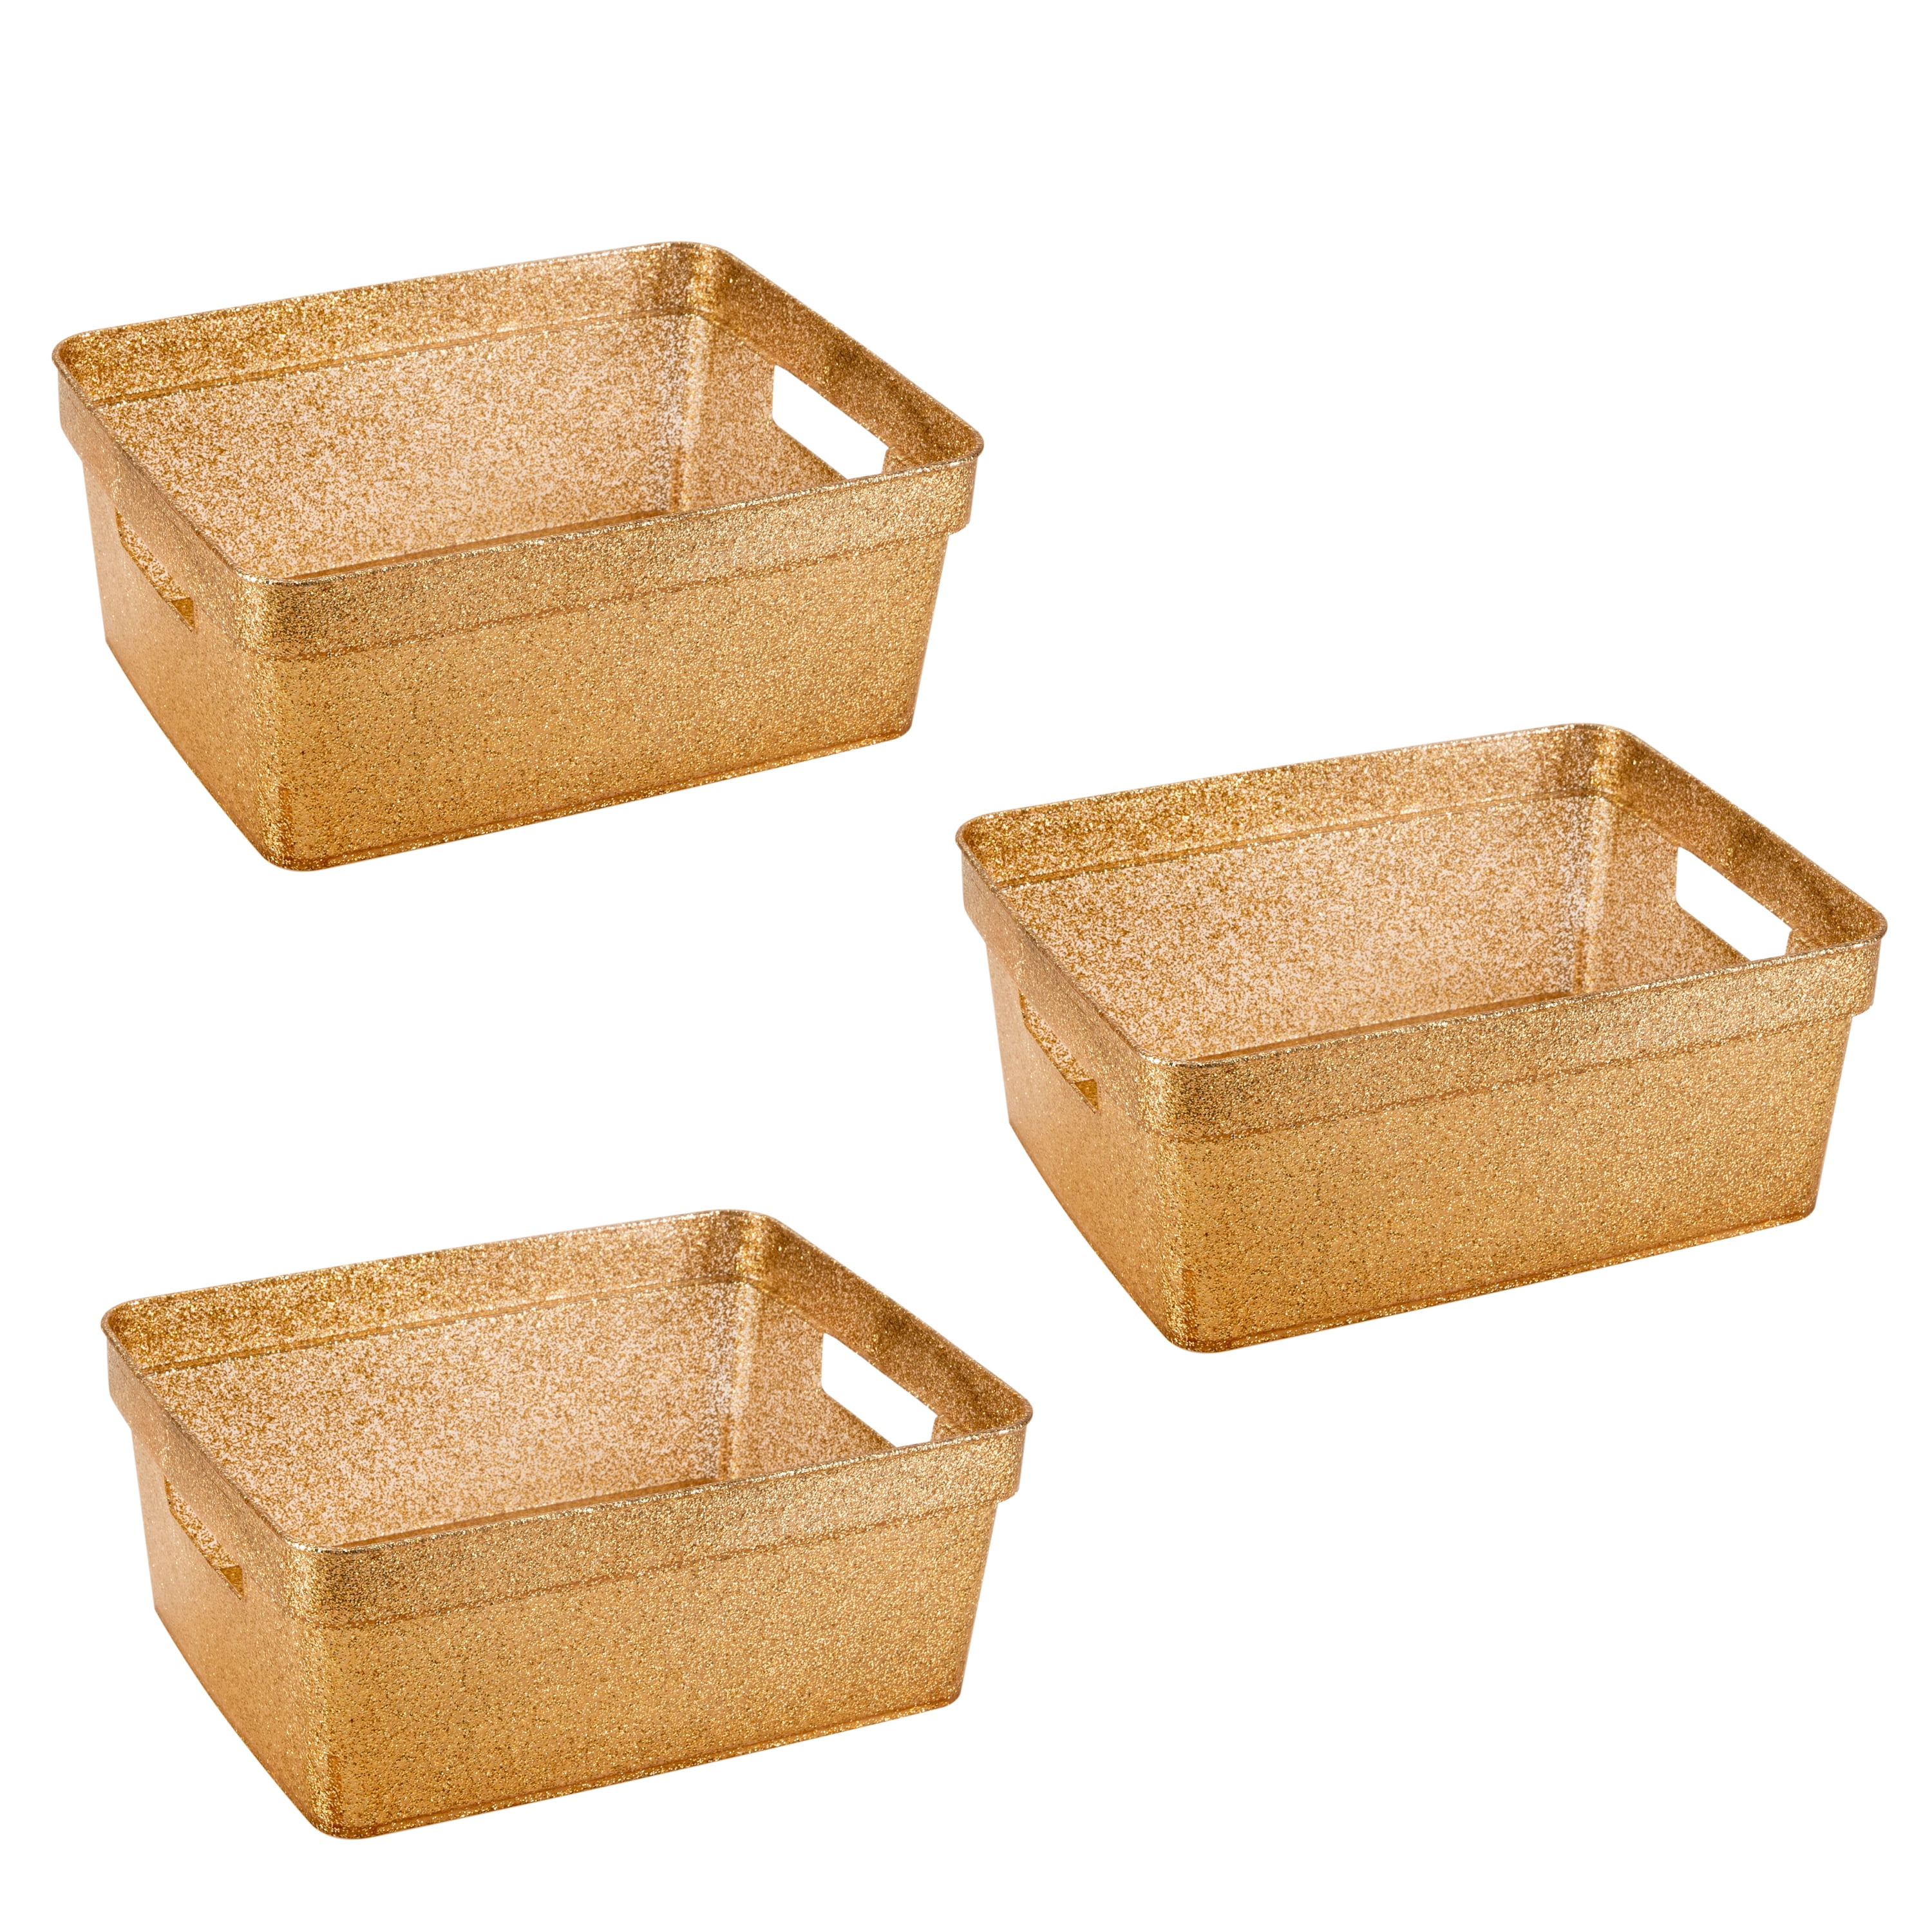 Bino | Plastic Storage Baskets with Lids, Small - 4 Pack | The Jute Collection 